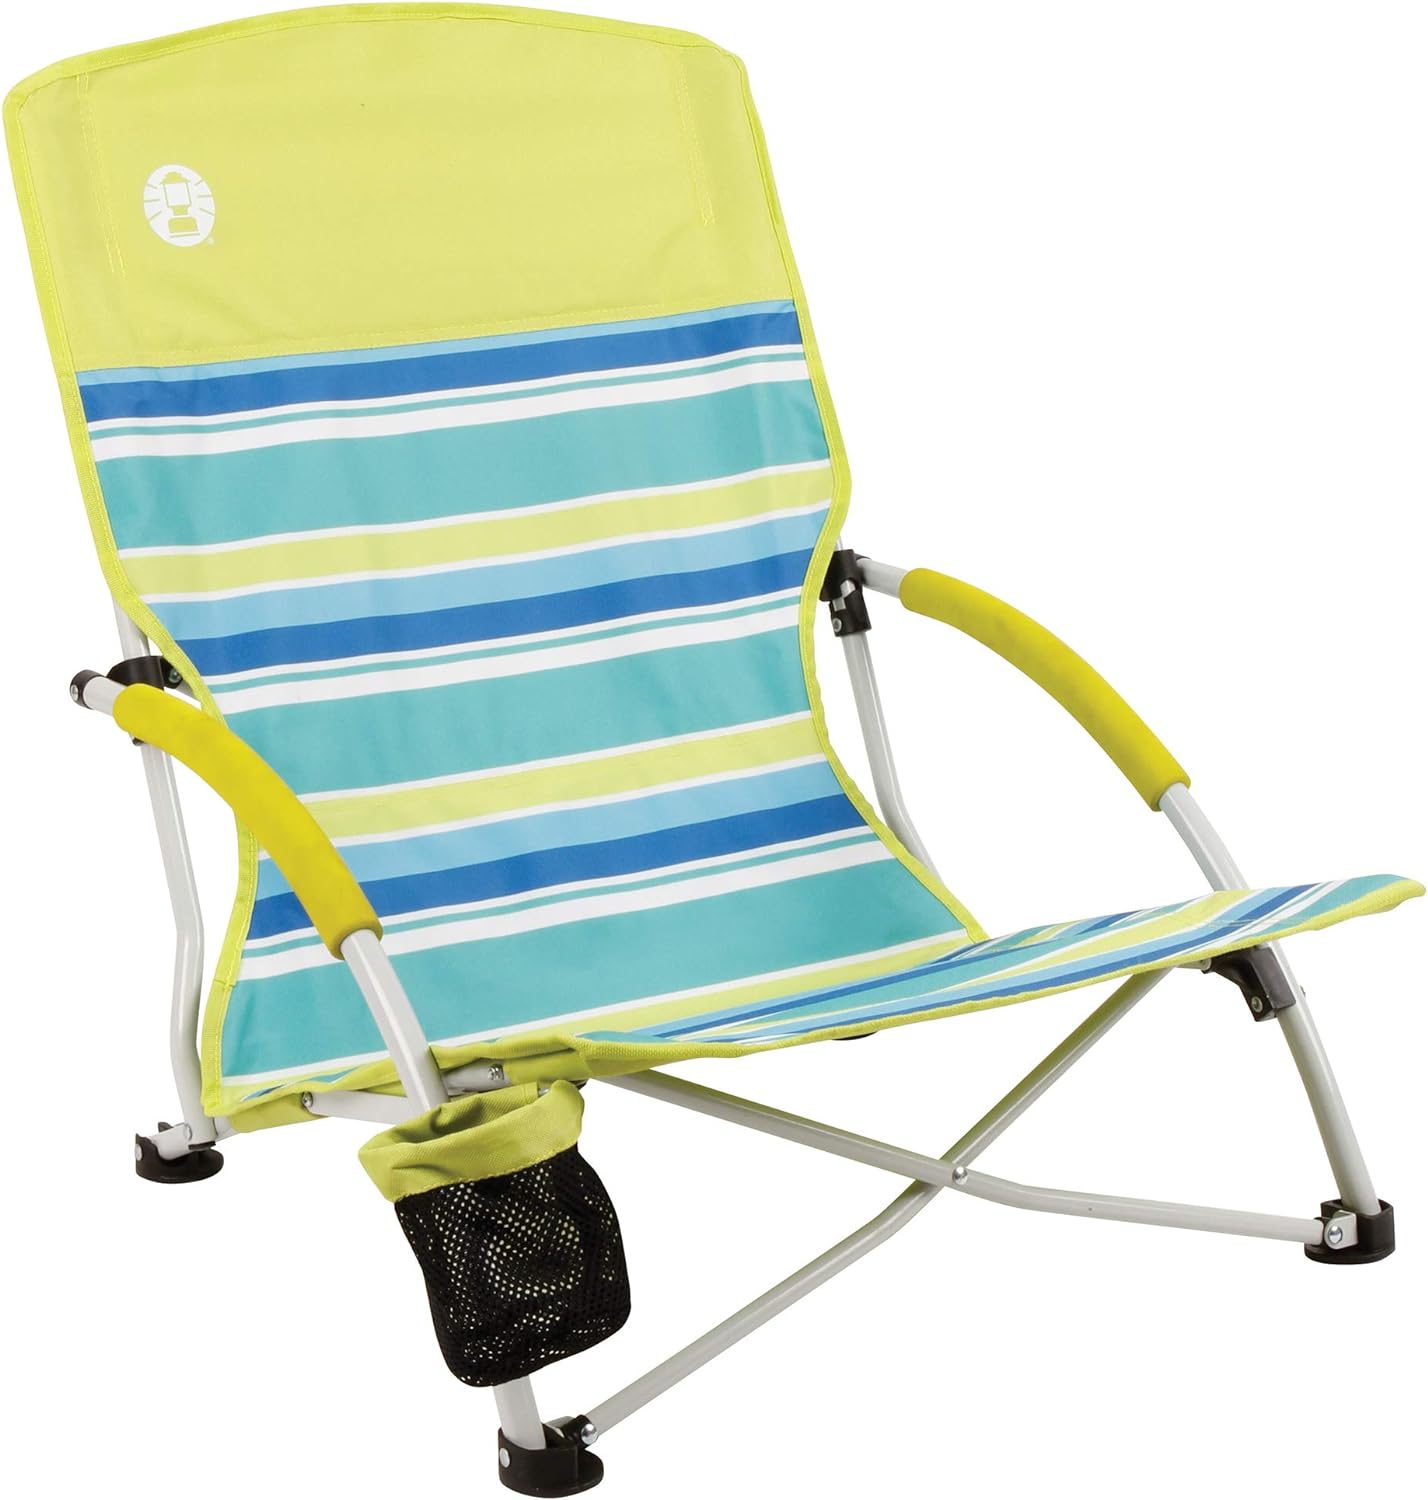 Coleman Utopia Breeze Beach Chair, Lightweight & Folding Beach Chair with Cup Holder, Seatback Pocket, & Relaxed Design; 21-inch Seat Supports up to 250lbs